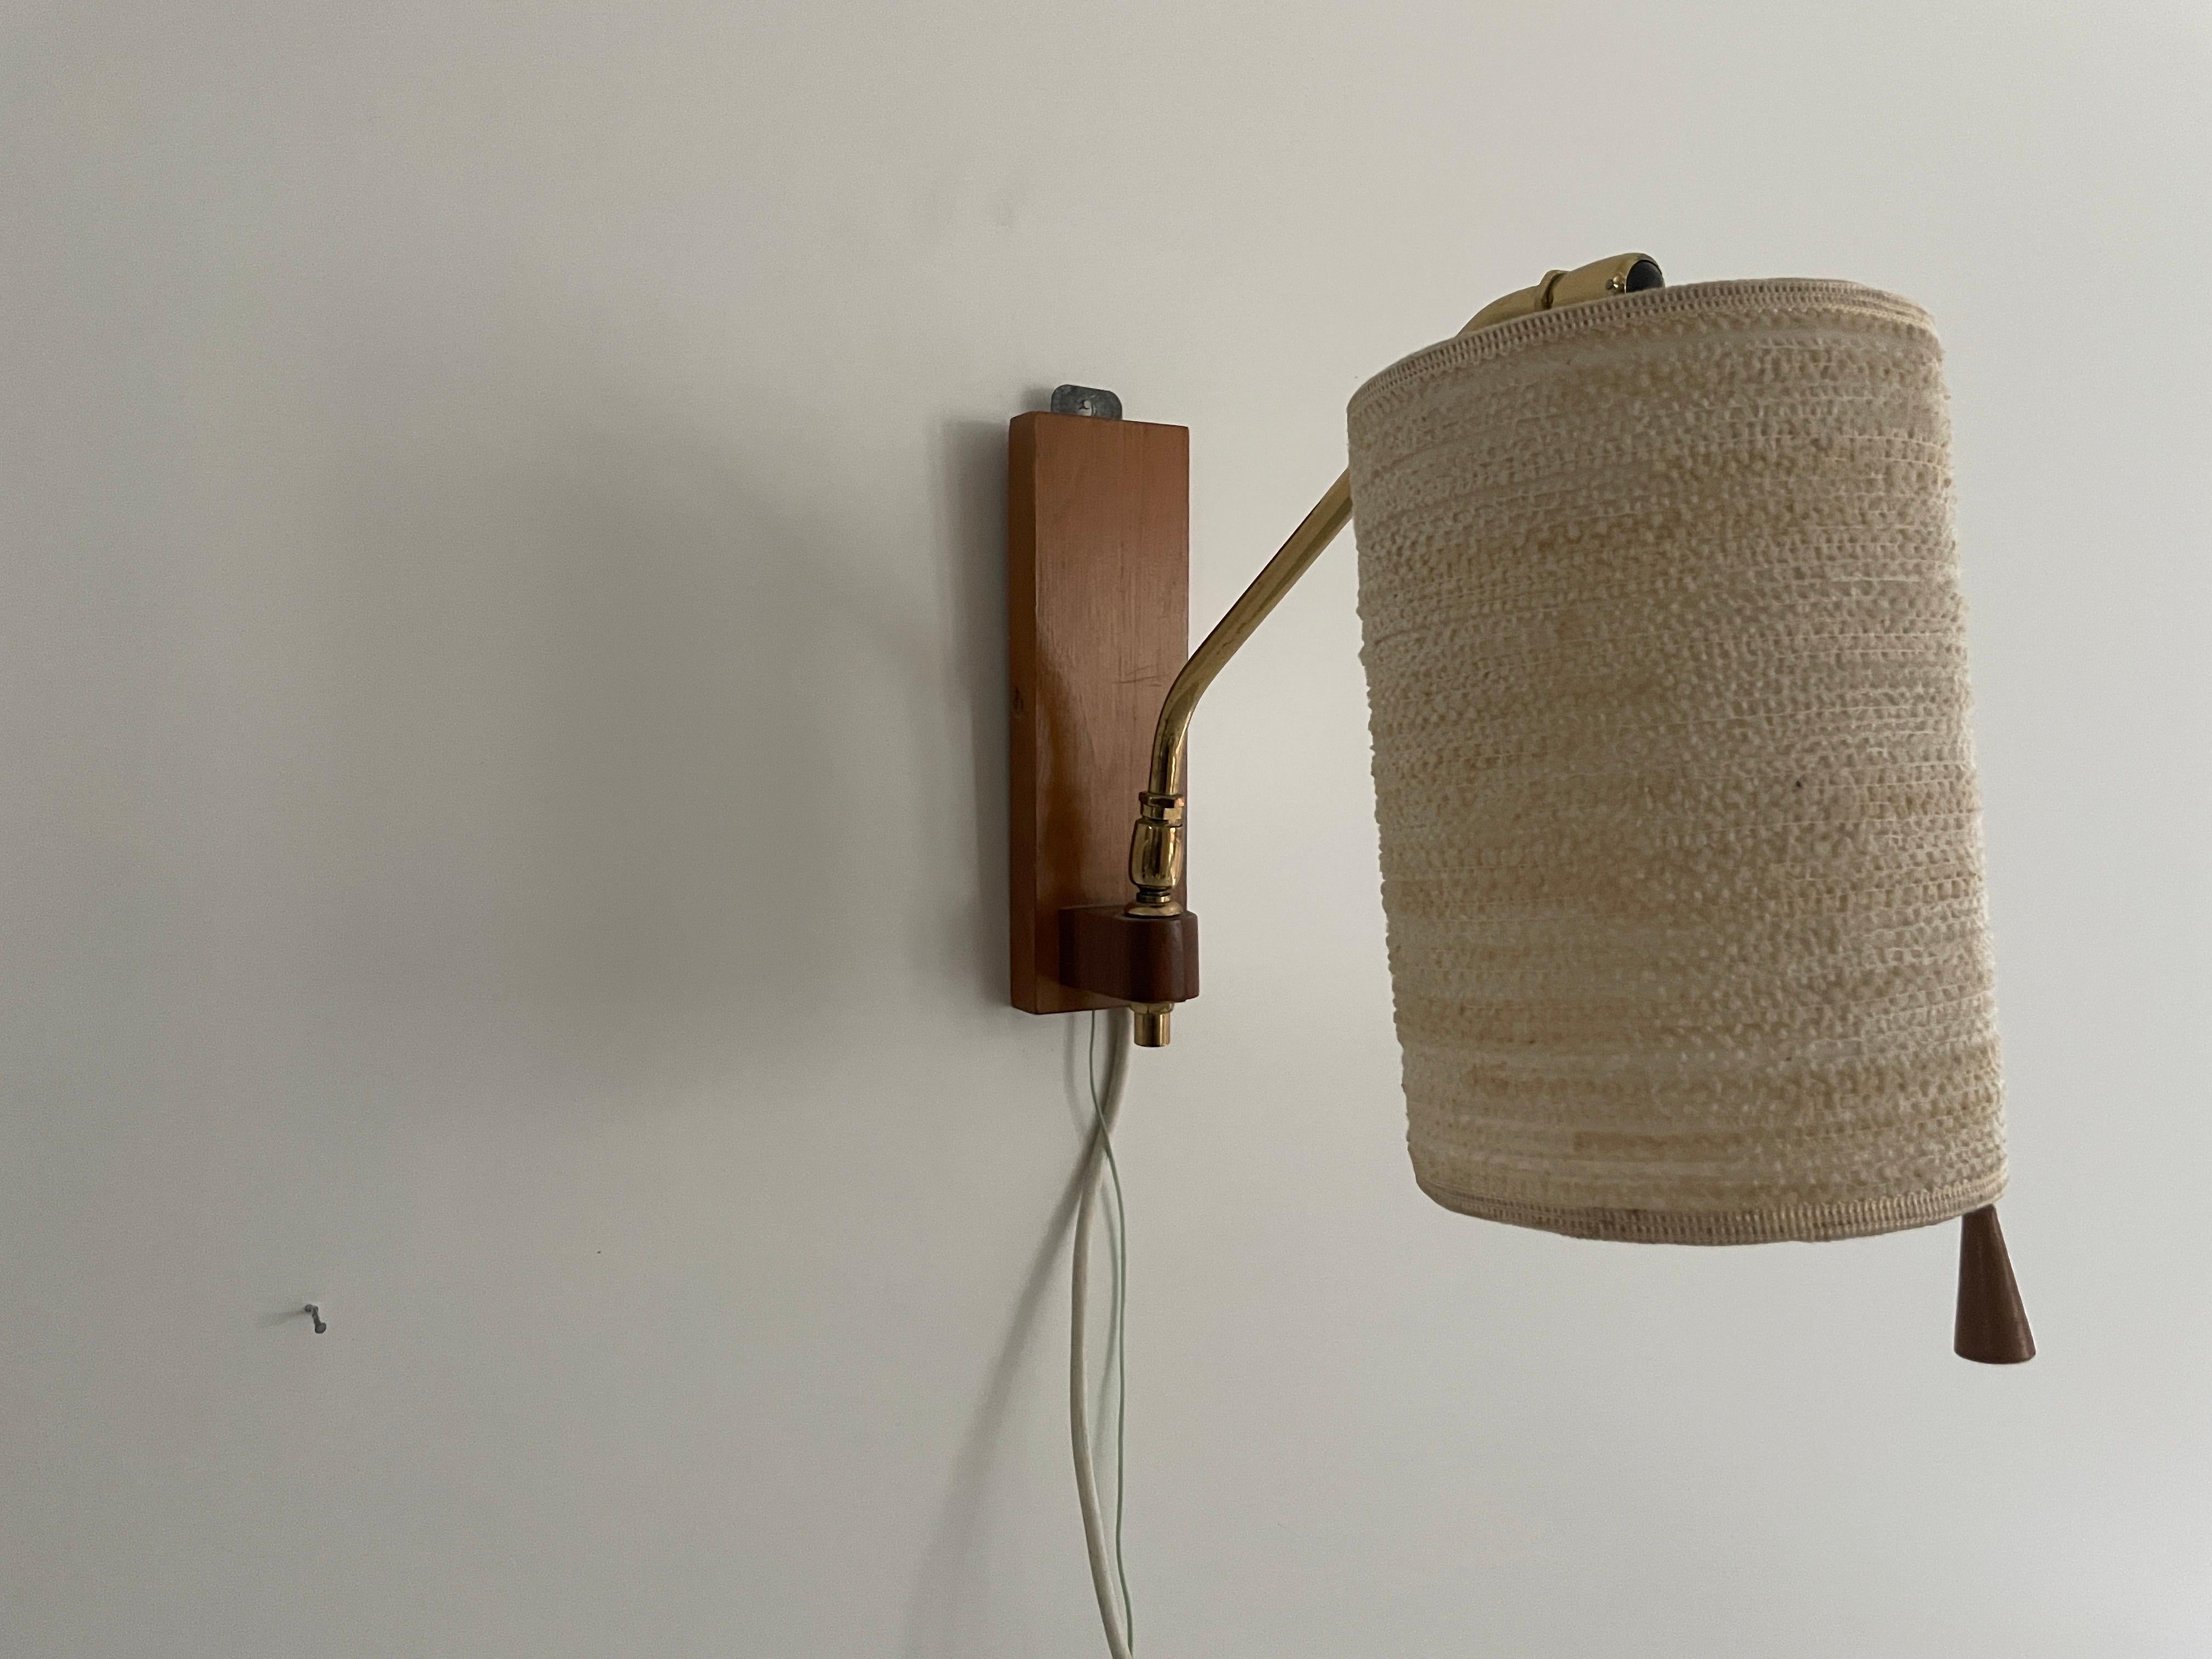 Fabric Shade and Wood Wall Lamp with Brass Neck, 1960s, Germany

Lampshade is in very good vintage condition.
No crack, no missed piece.

This lamp works with E27 light bulb. Max 100W
Wired and suitable to use with 220V and 110V for all